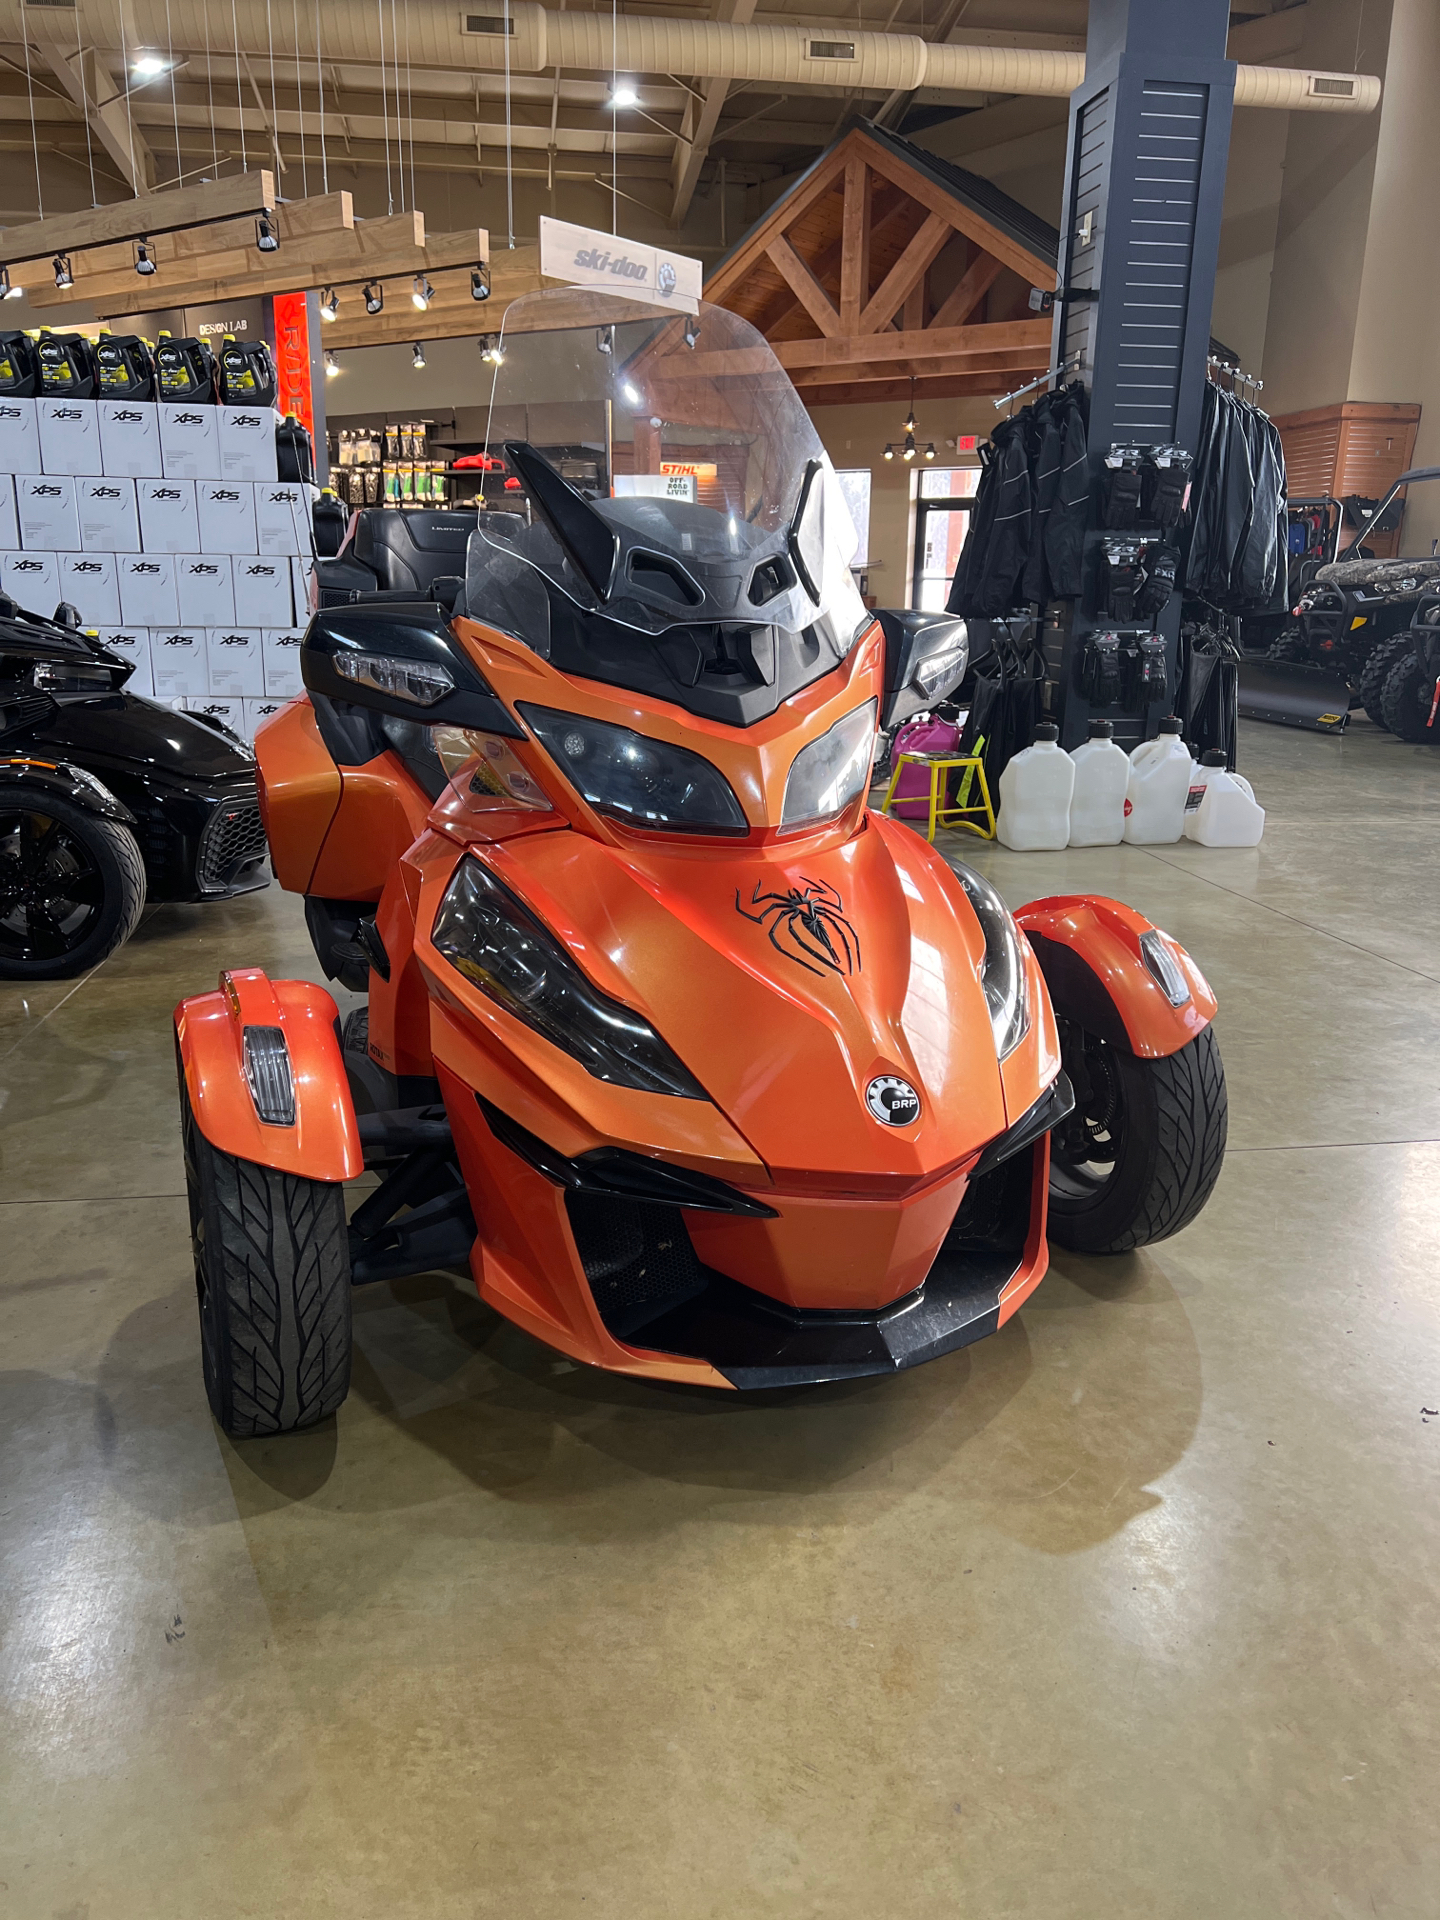 2019 Can-Am Spyder RT Limited in Elma, New York - Photo 2